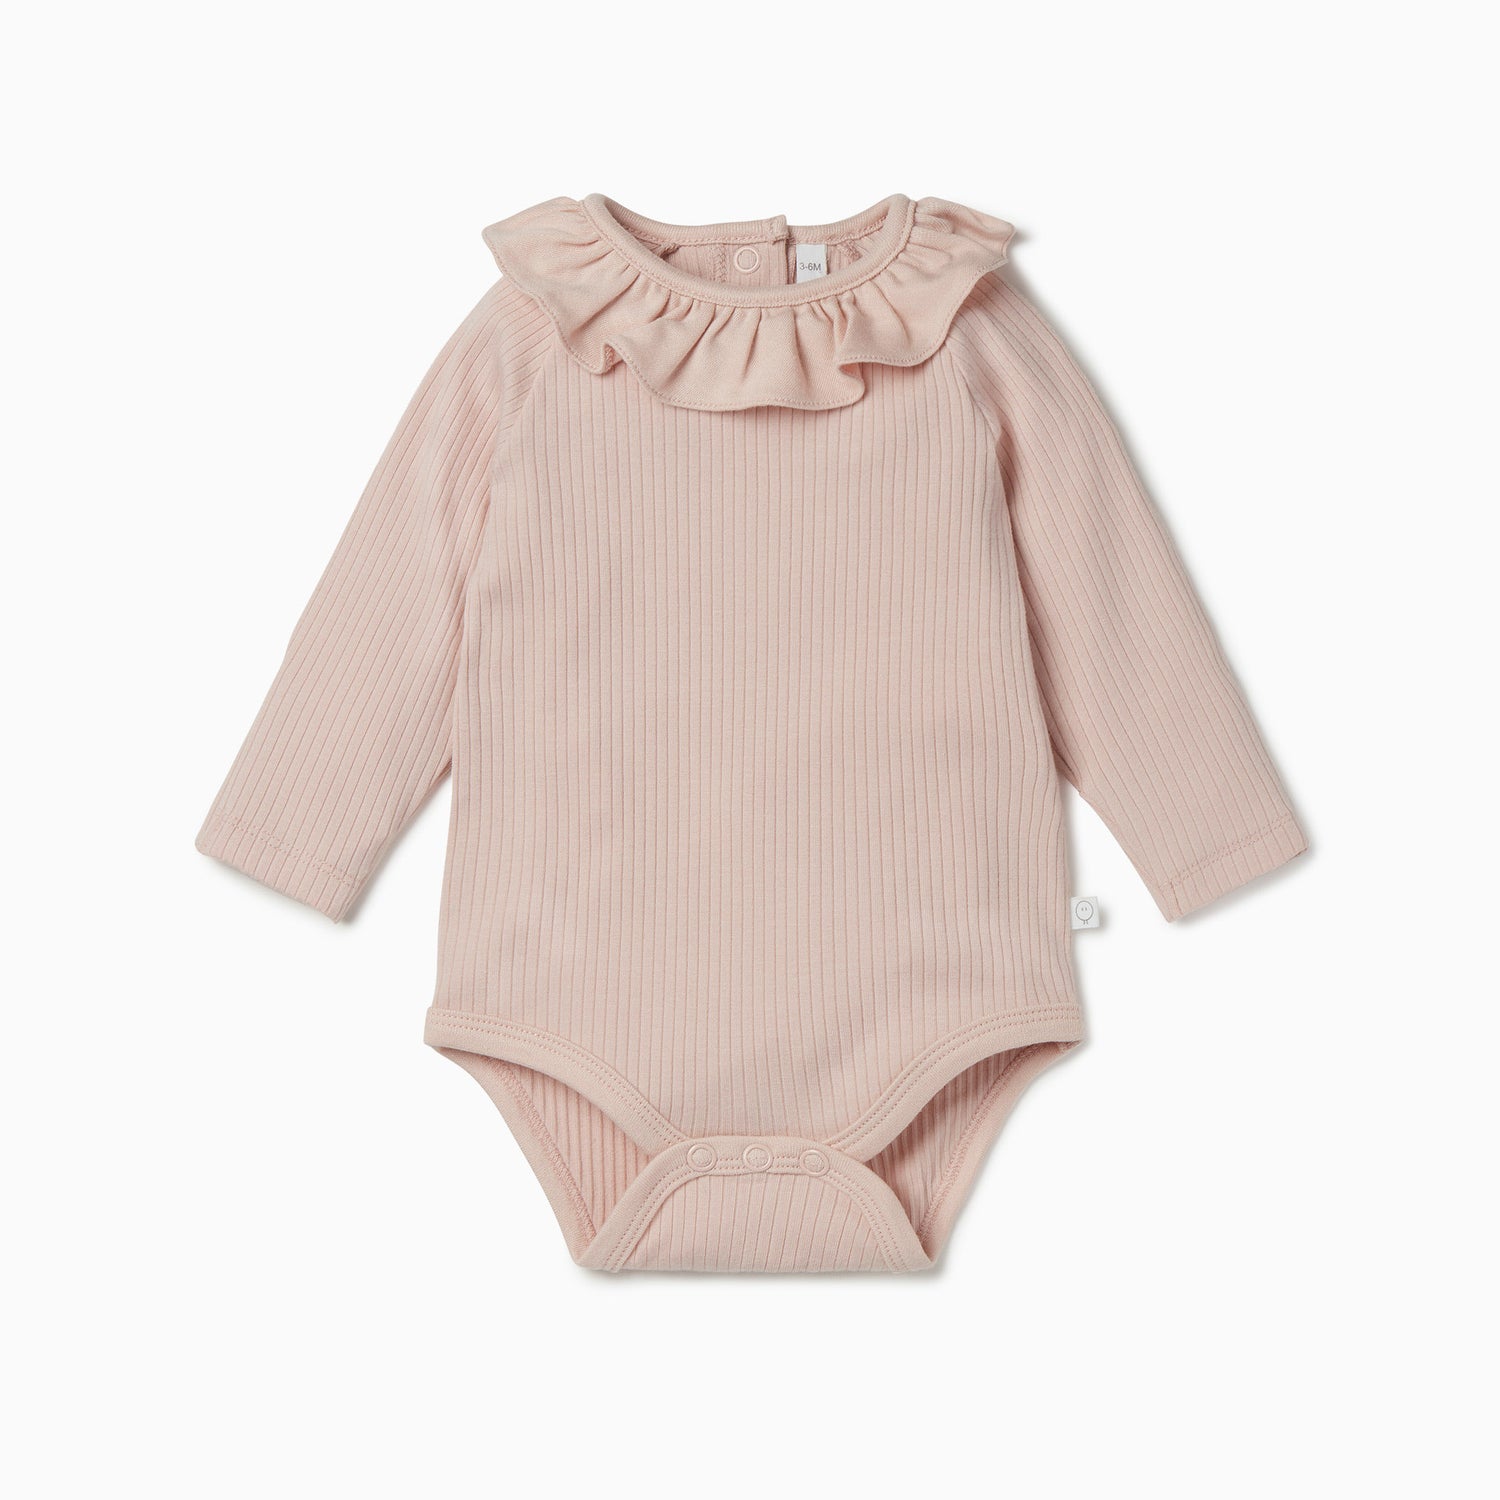 Ribbed long sleeve bodysuit with frill collar in blush